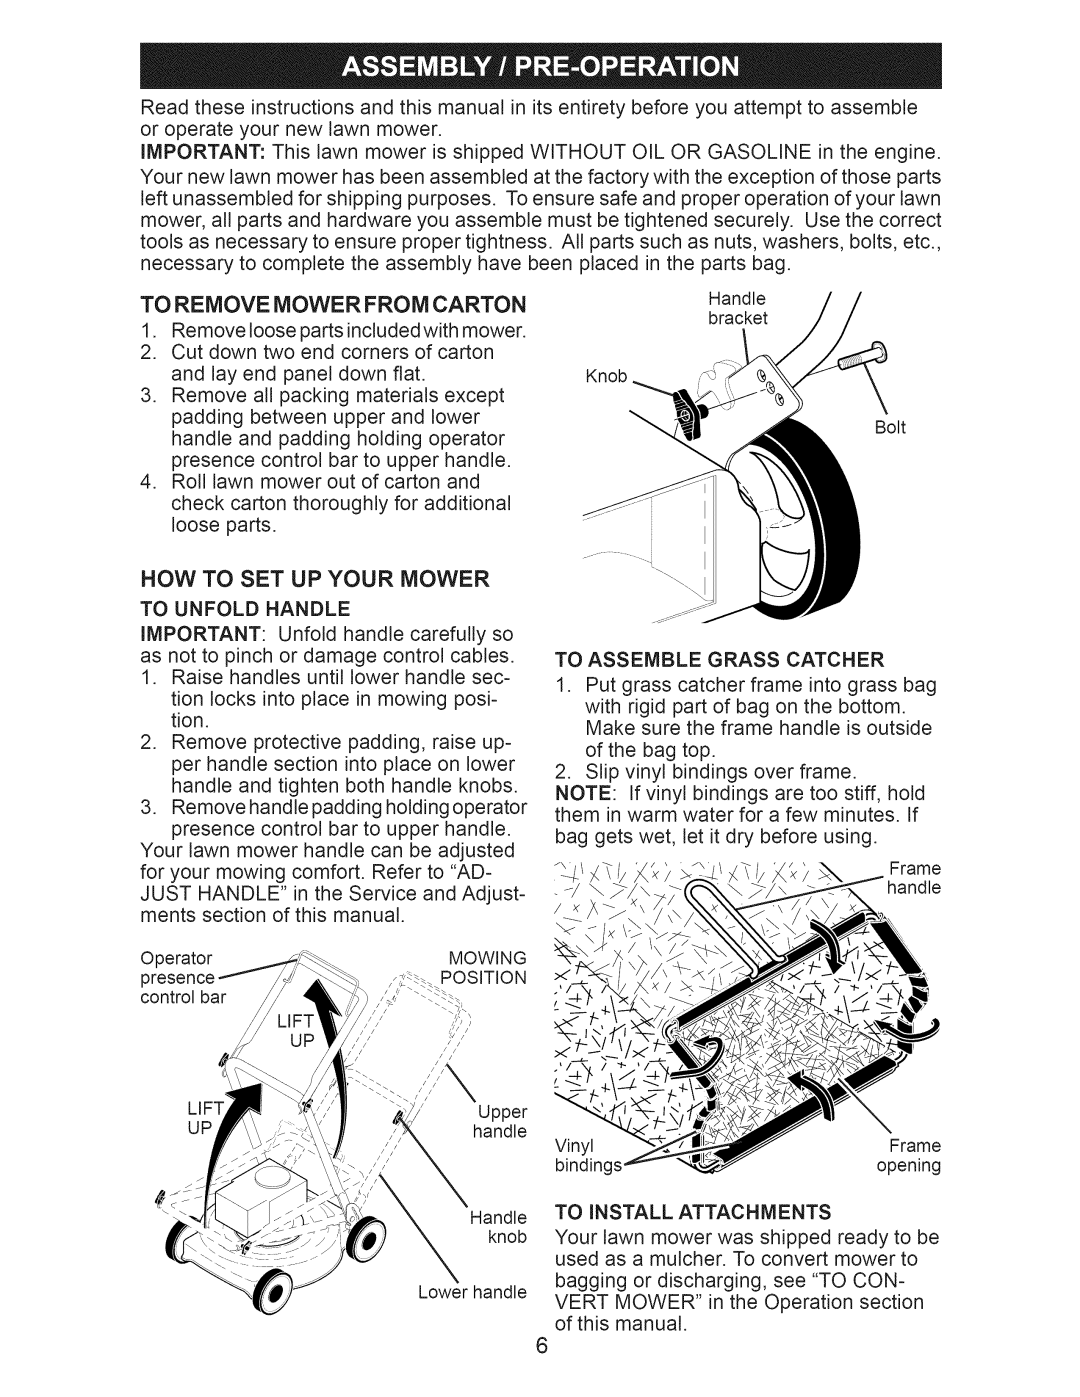 Craftsman 917.374091 owner manual To Remove Mower From Carton, Now To Set Up Your Mower 